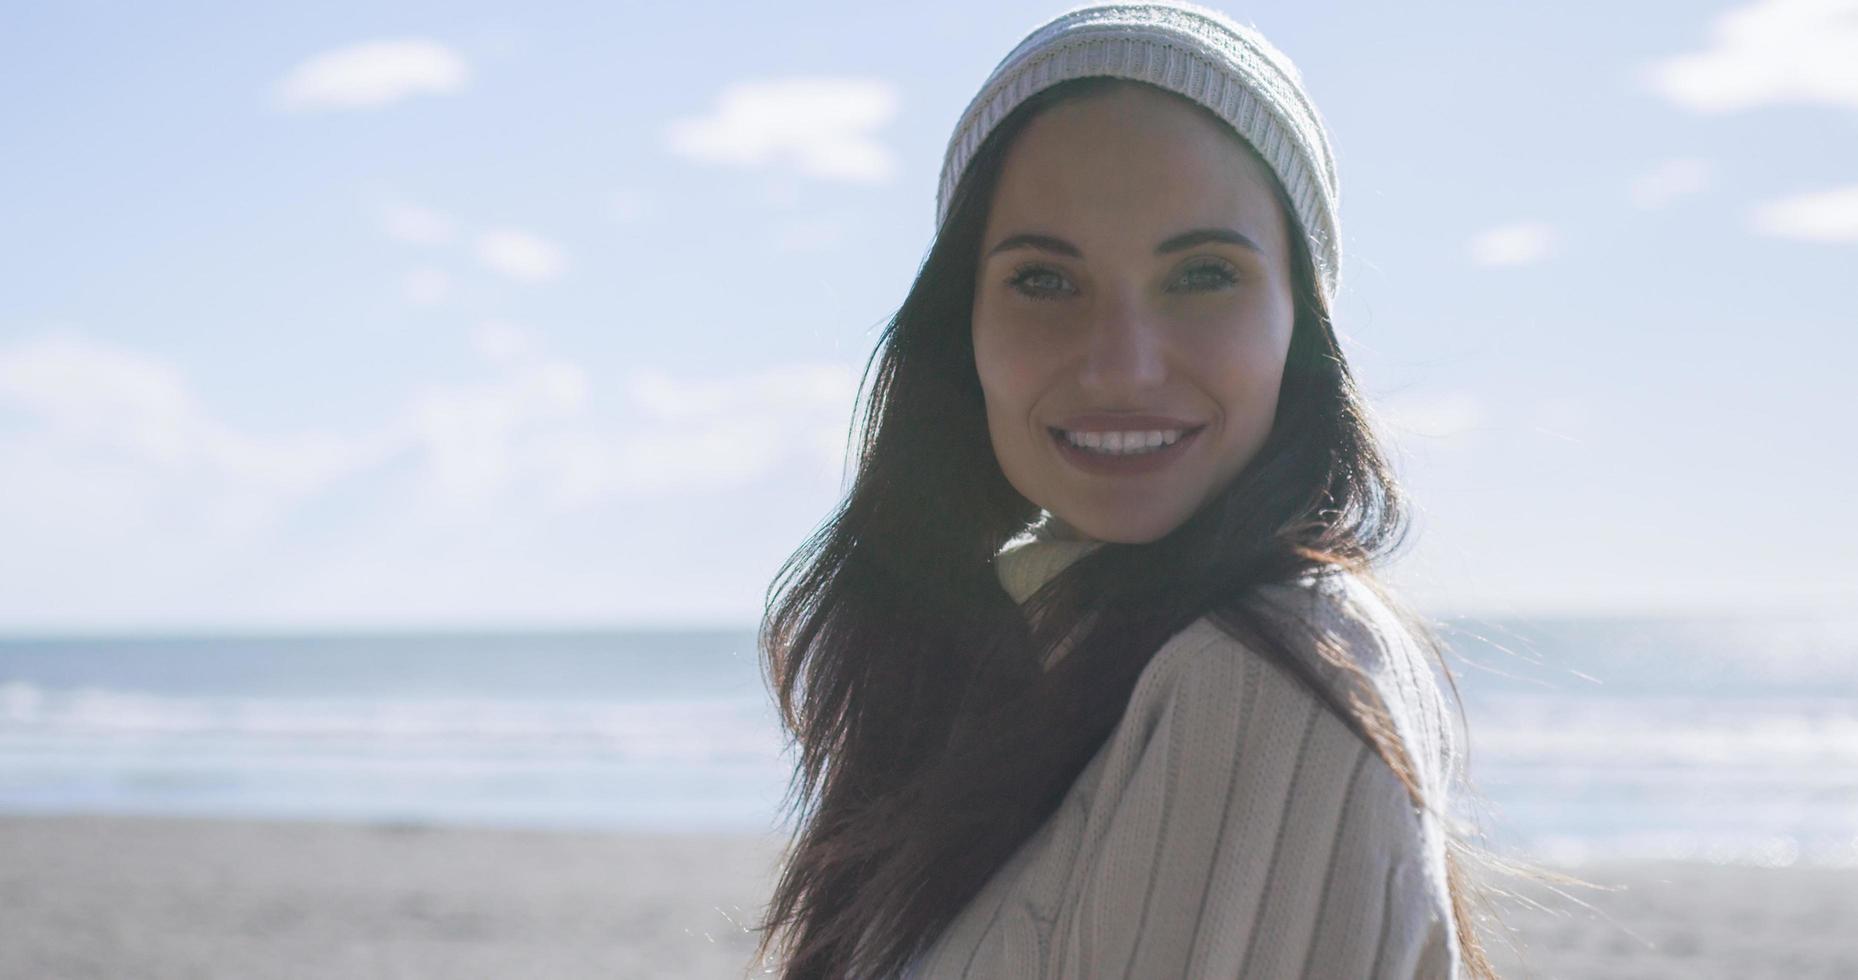 Girl In Autumn Clothes Smiling on beach photo